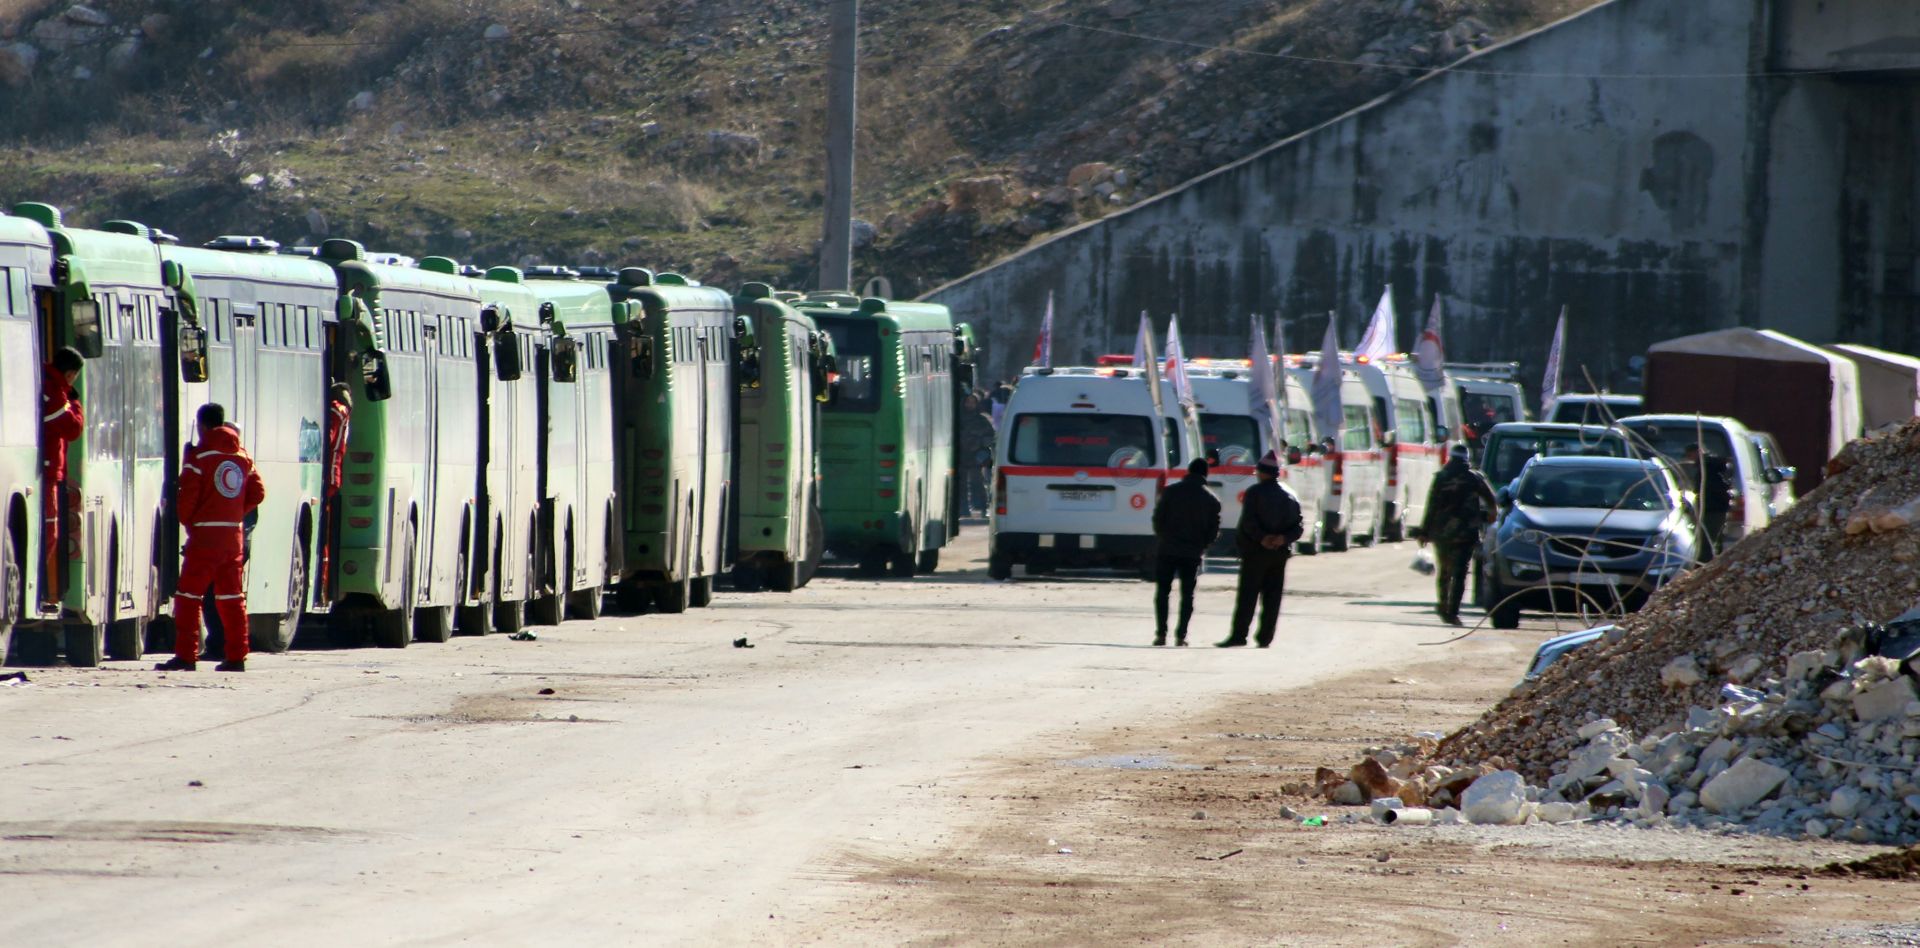 epa05677020 Busses and ambulances wait to evacuate fighters and their families from rebel-held zones in Aleppo, Syria, 15 December 2016. The evacuation of Aleppo began on 15 December as the first ambulances and buses extracted the sick and wounded from final rebel-held zones in the northern Syrian city, the Red Cross NGO said. Reports state the first batch of 951 gunmen and their families were evacuated via al-Ramouseh crossing to Aleppo southwestern countryside.  EPA/STR